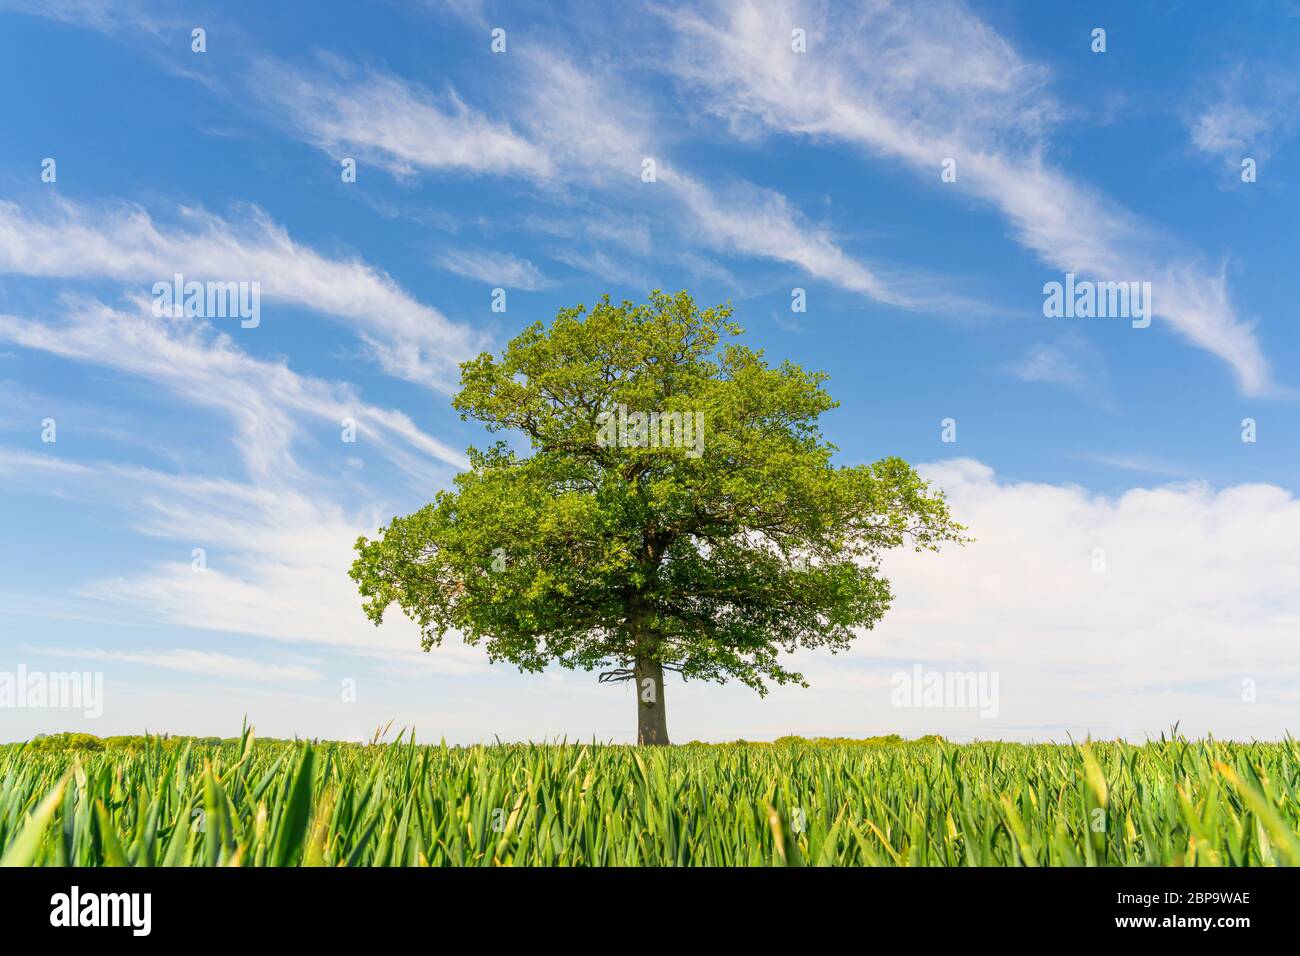 Single Oak tree in a field of young green wheat against a clear blue sky with wispy white clouds. Much Hadham, Hertfordshire. UK Stock Photo